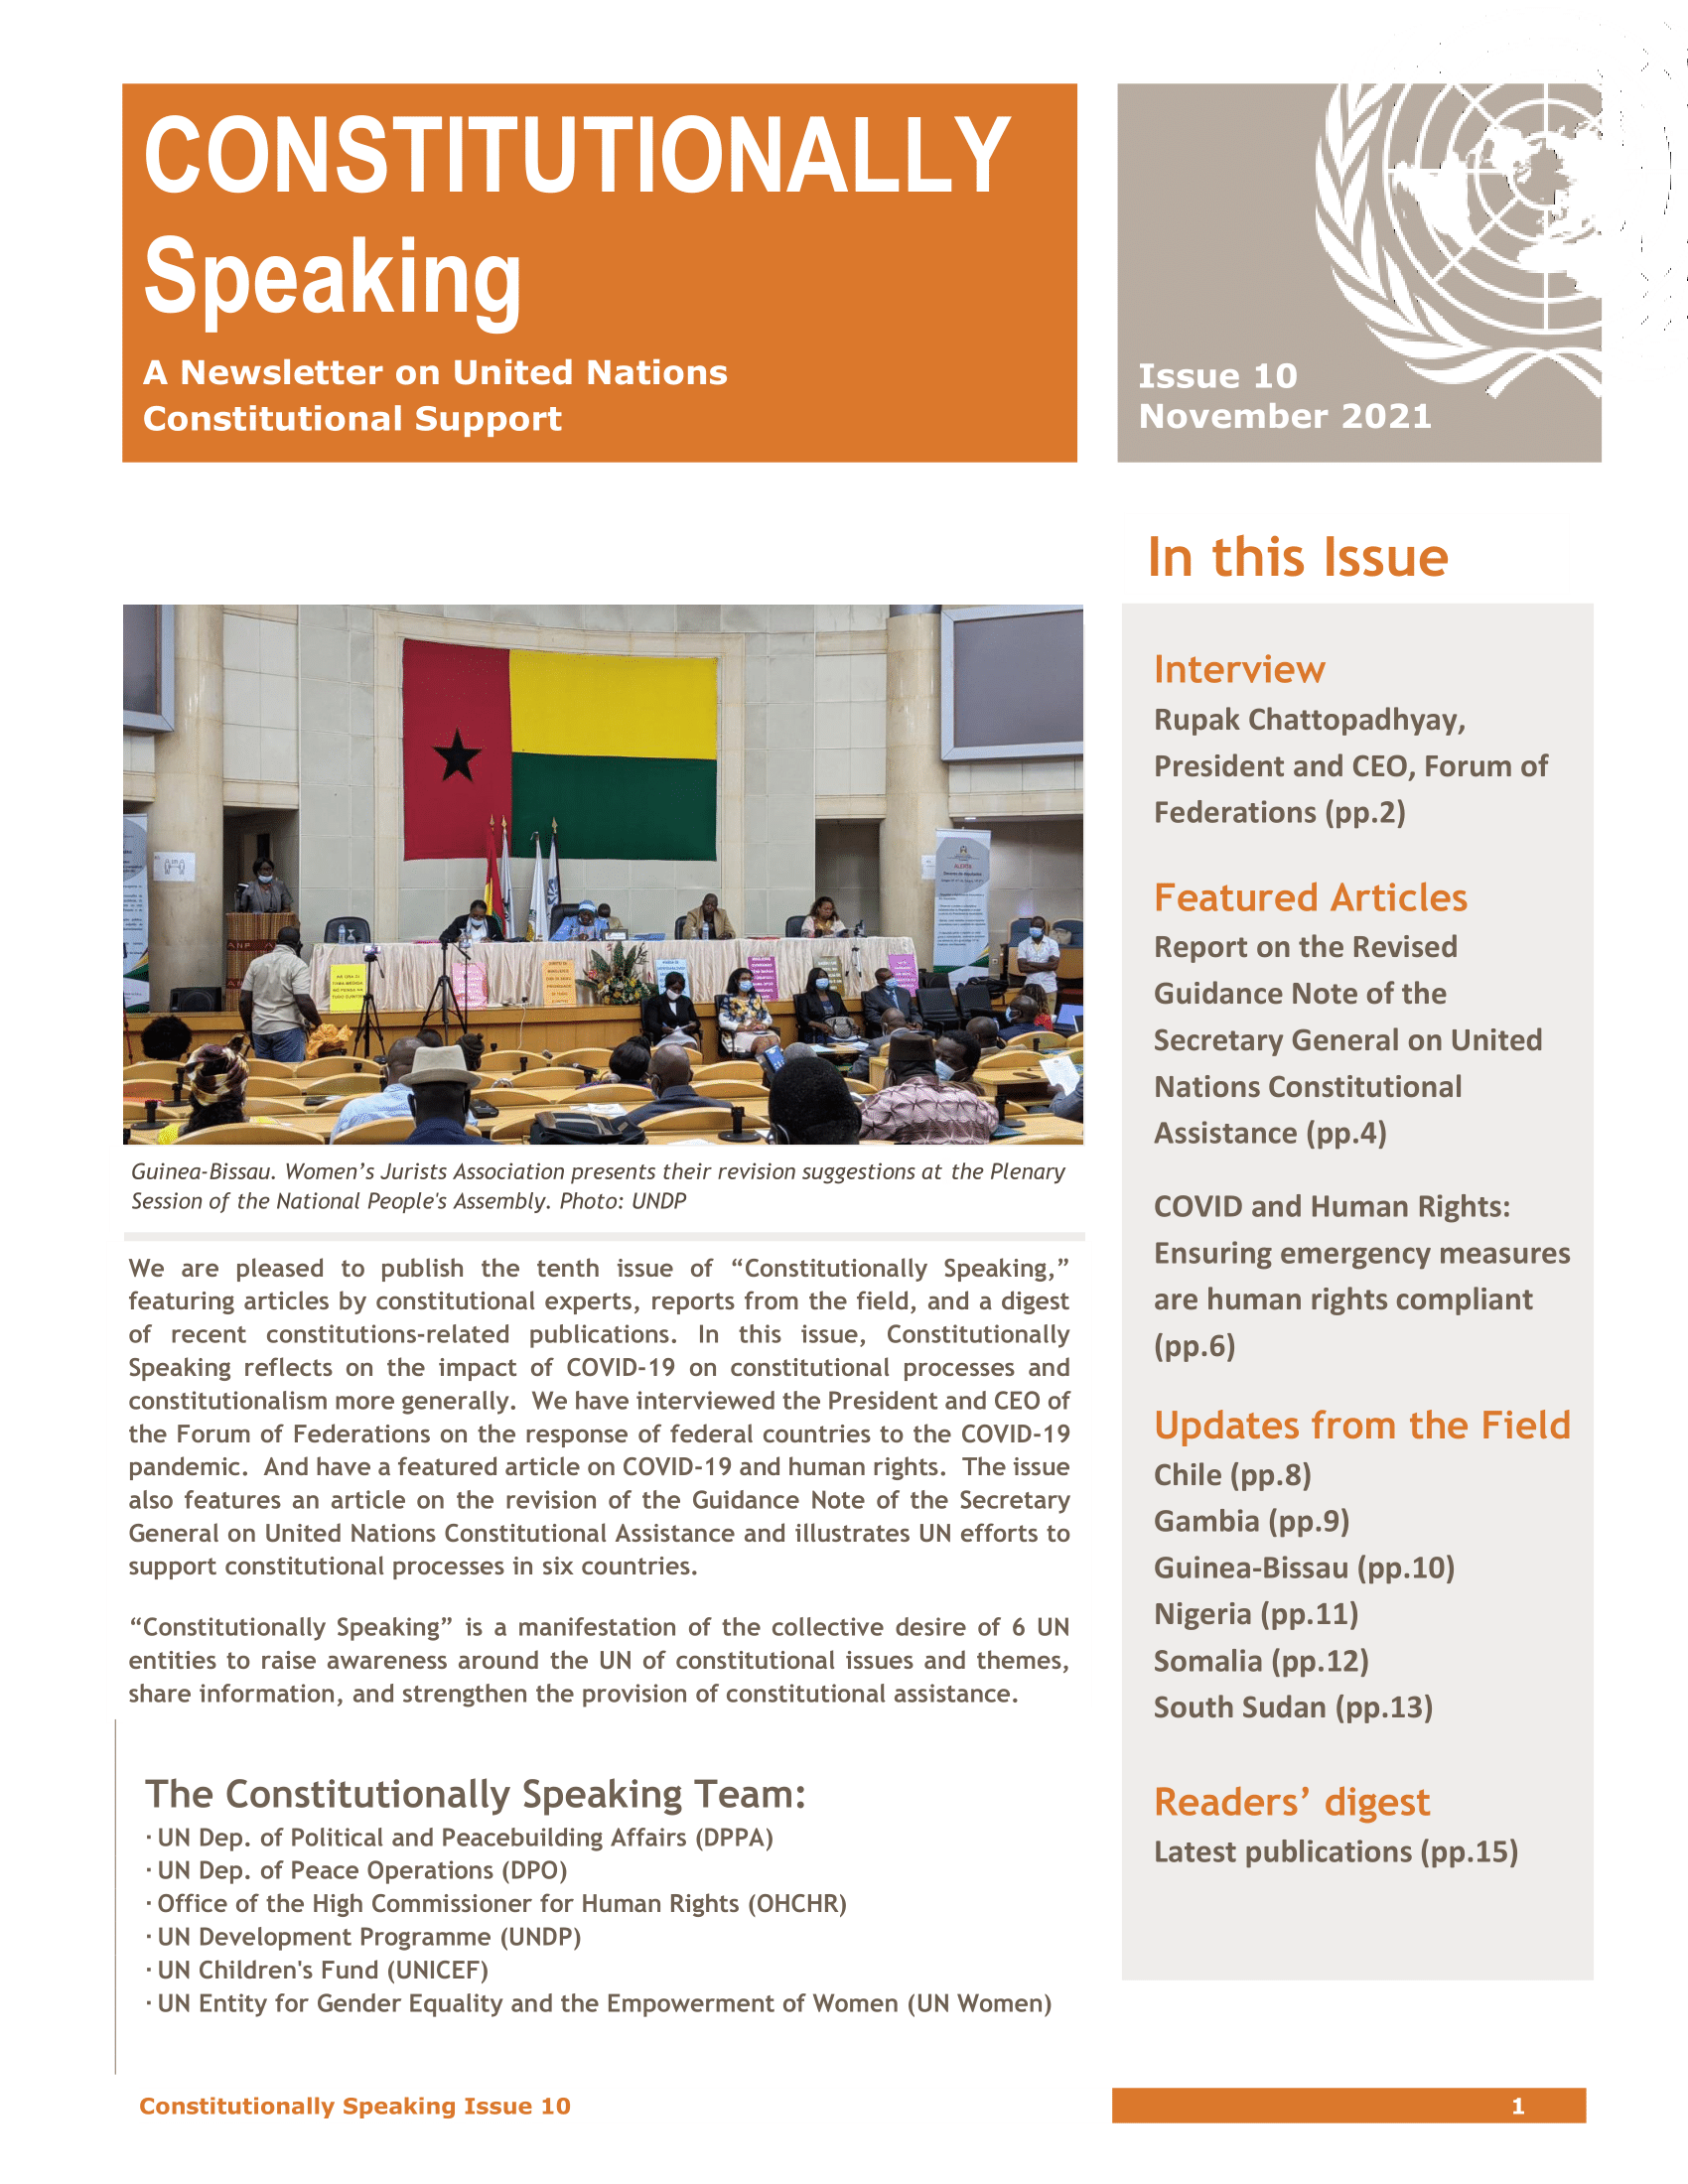 Cover Page of Constitutionally Speaking Newsletter: An Interview with Rupak Chattopadhyay